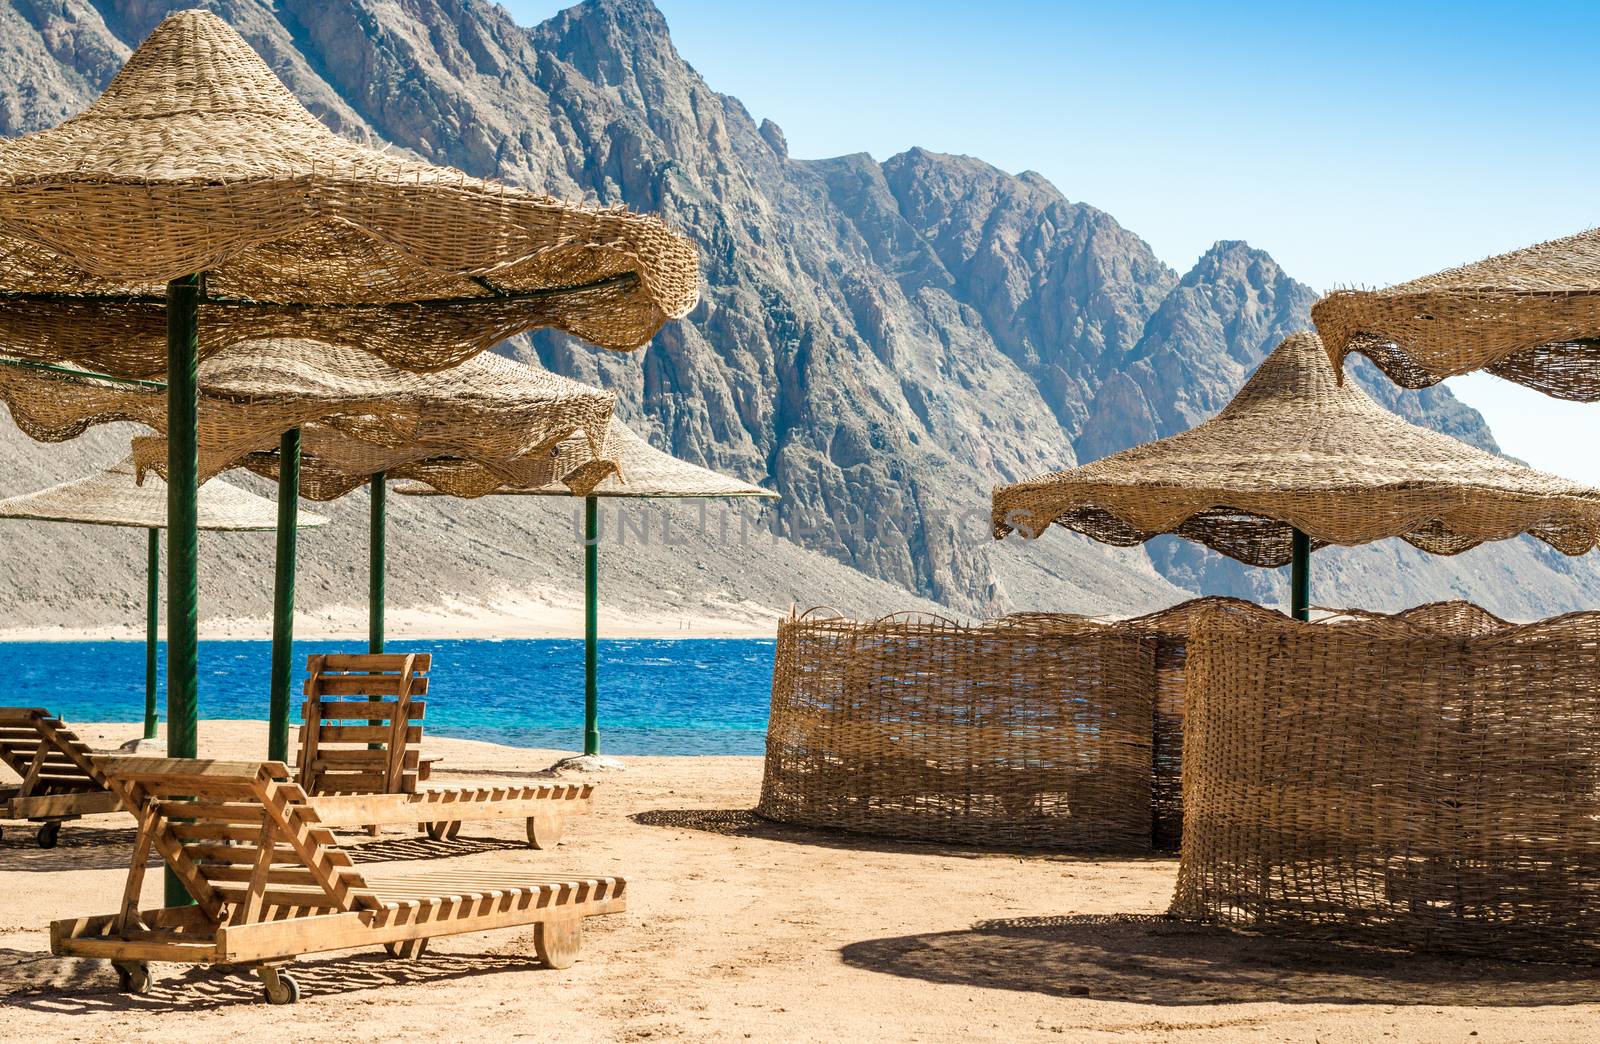 beach umbrellas and wooden lounge chairs on the sand of the beach against the backdrop of the sea and high rocky mountains